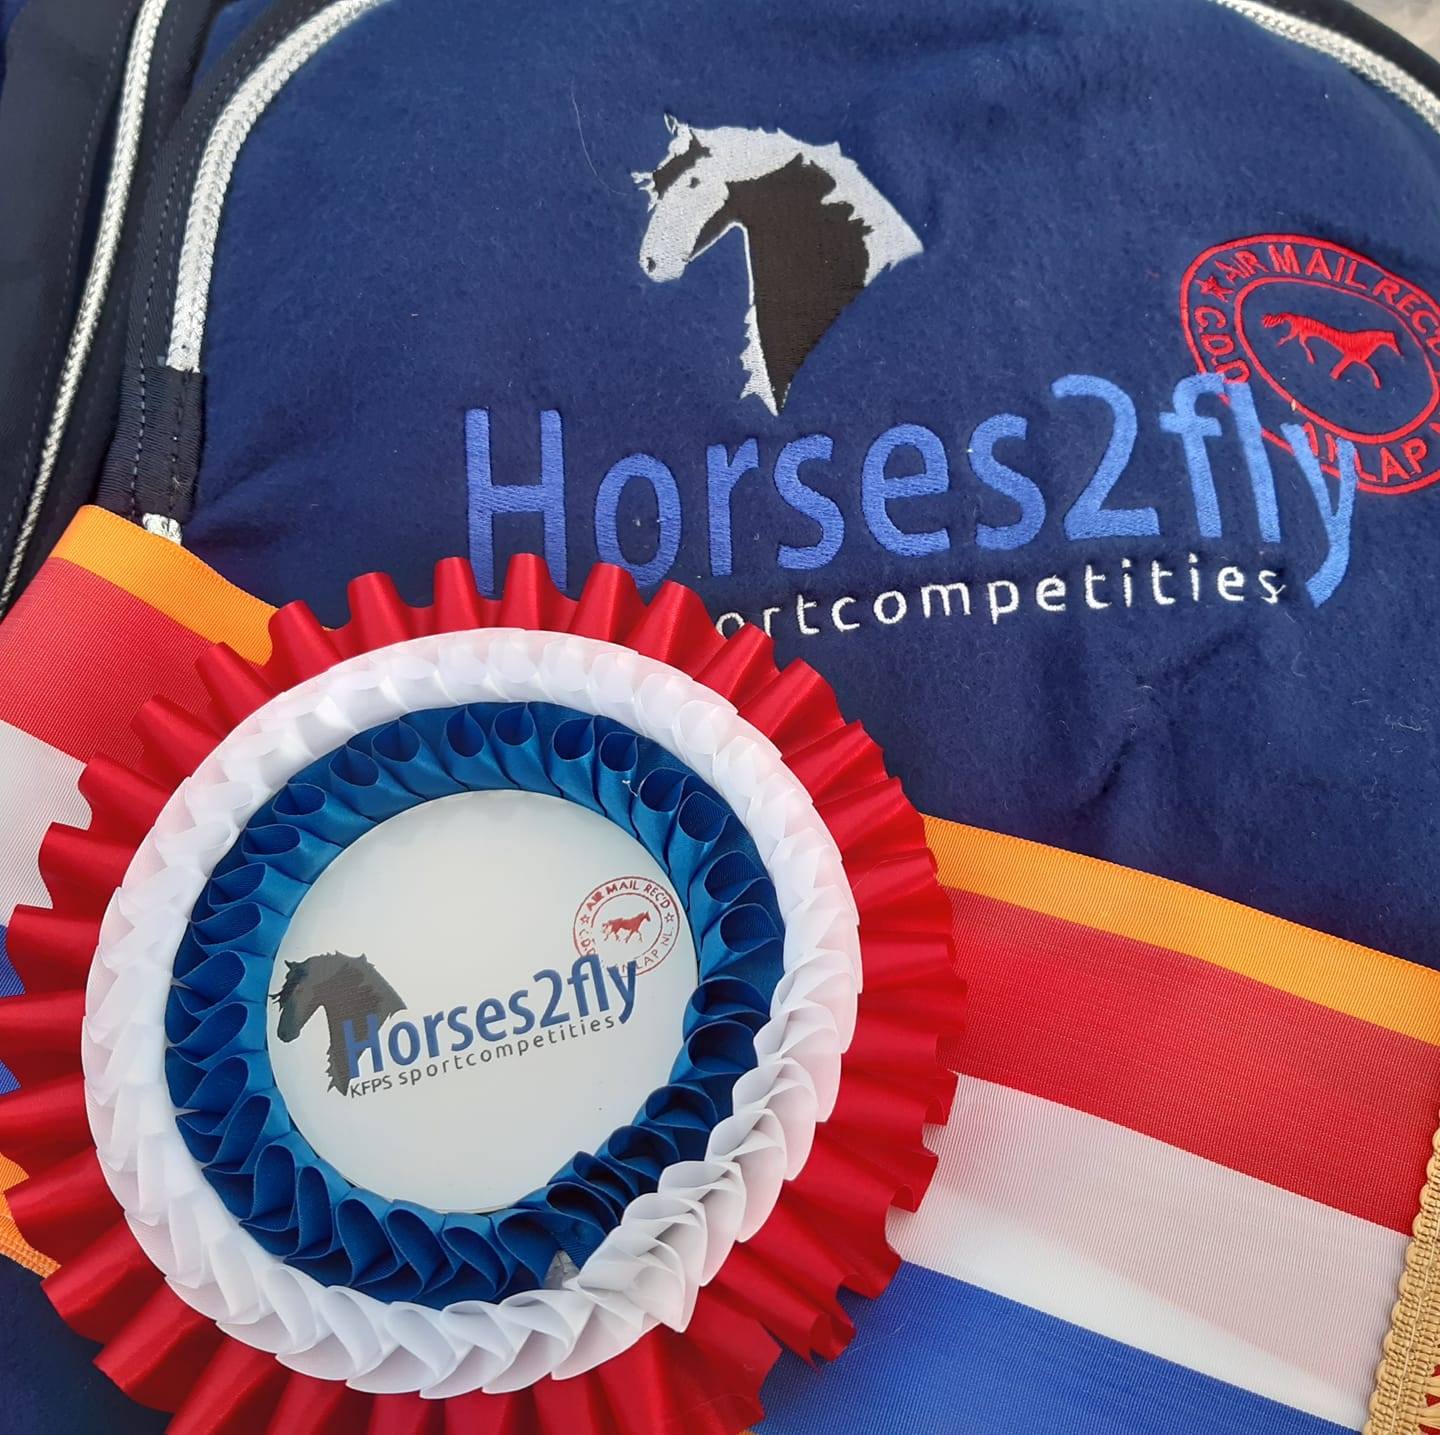 Finale Horses2Fly Sportcompetitie